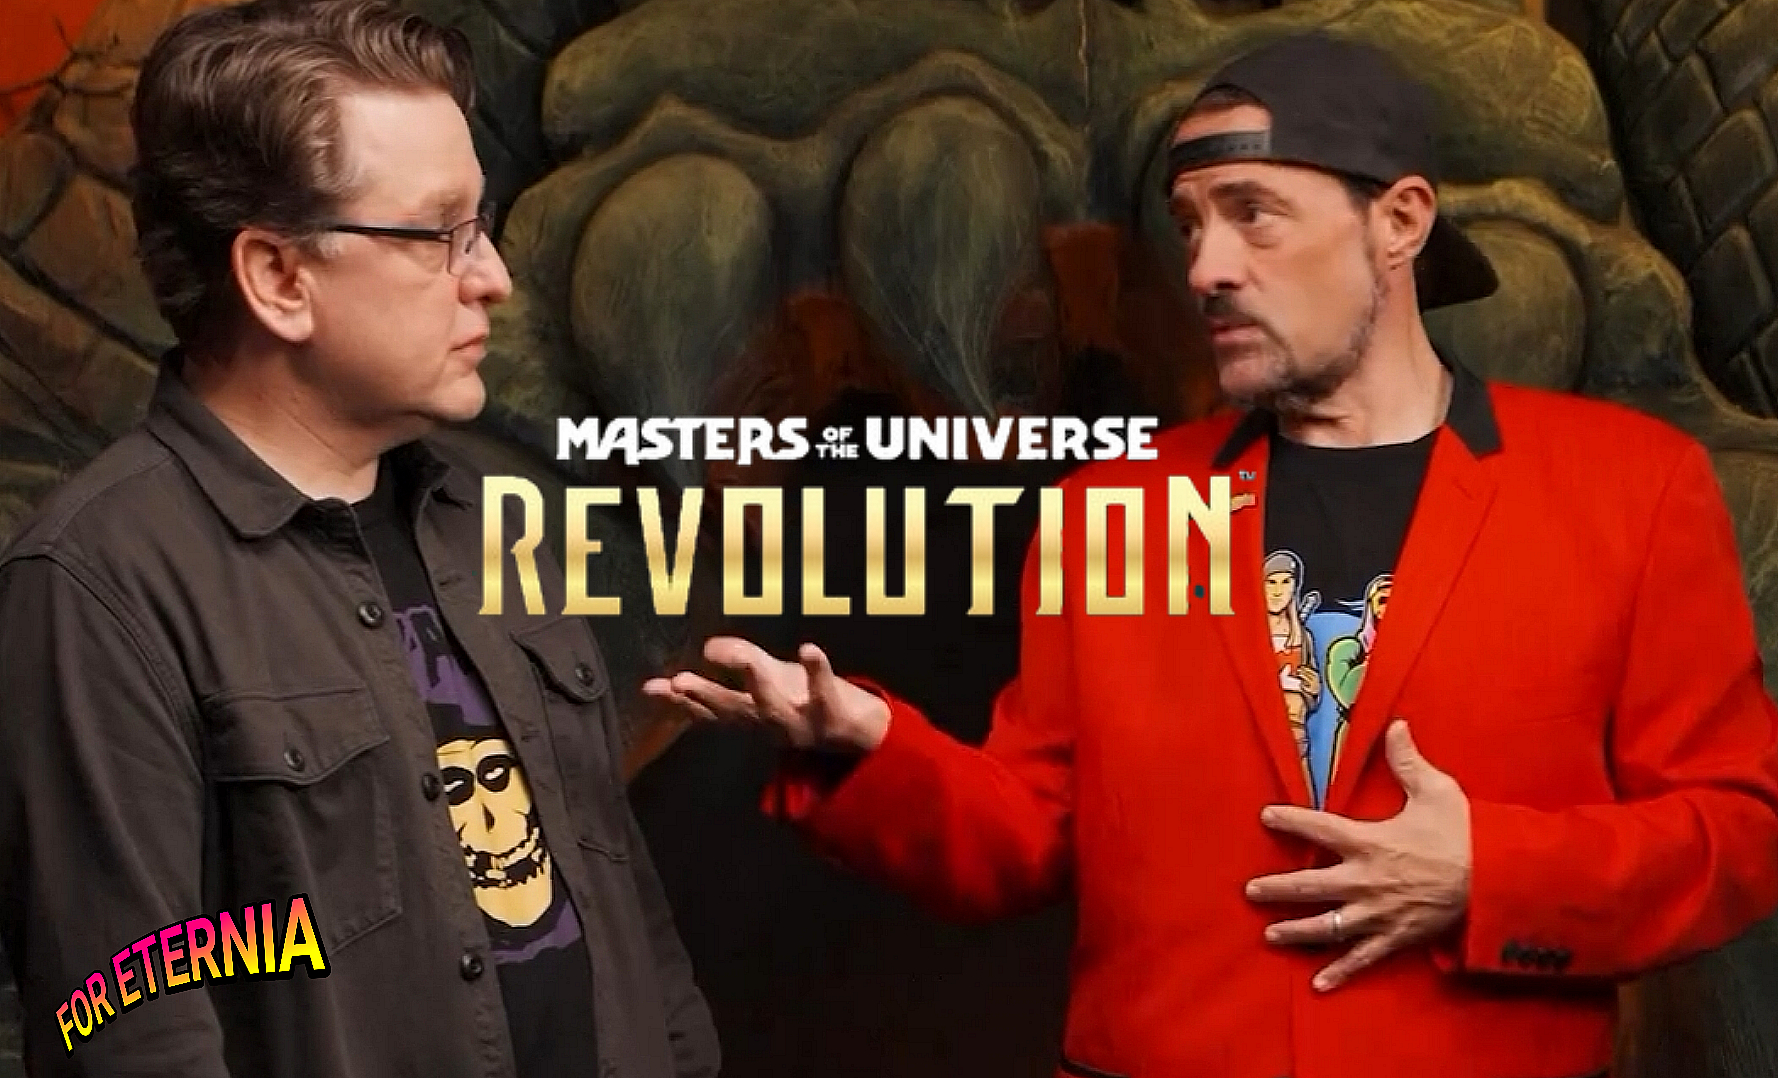 New “Masters of the Universe: Revolution” Promo Featurette Released with Rob David and Kevin Smith